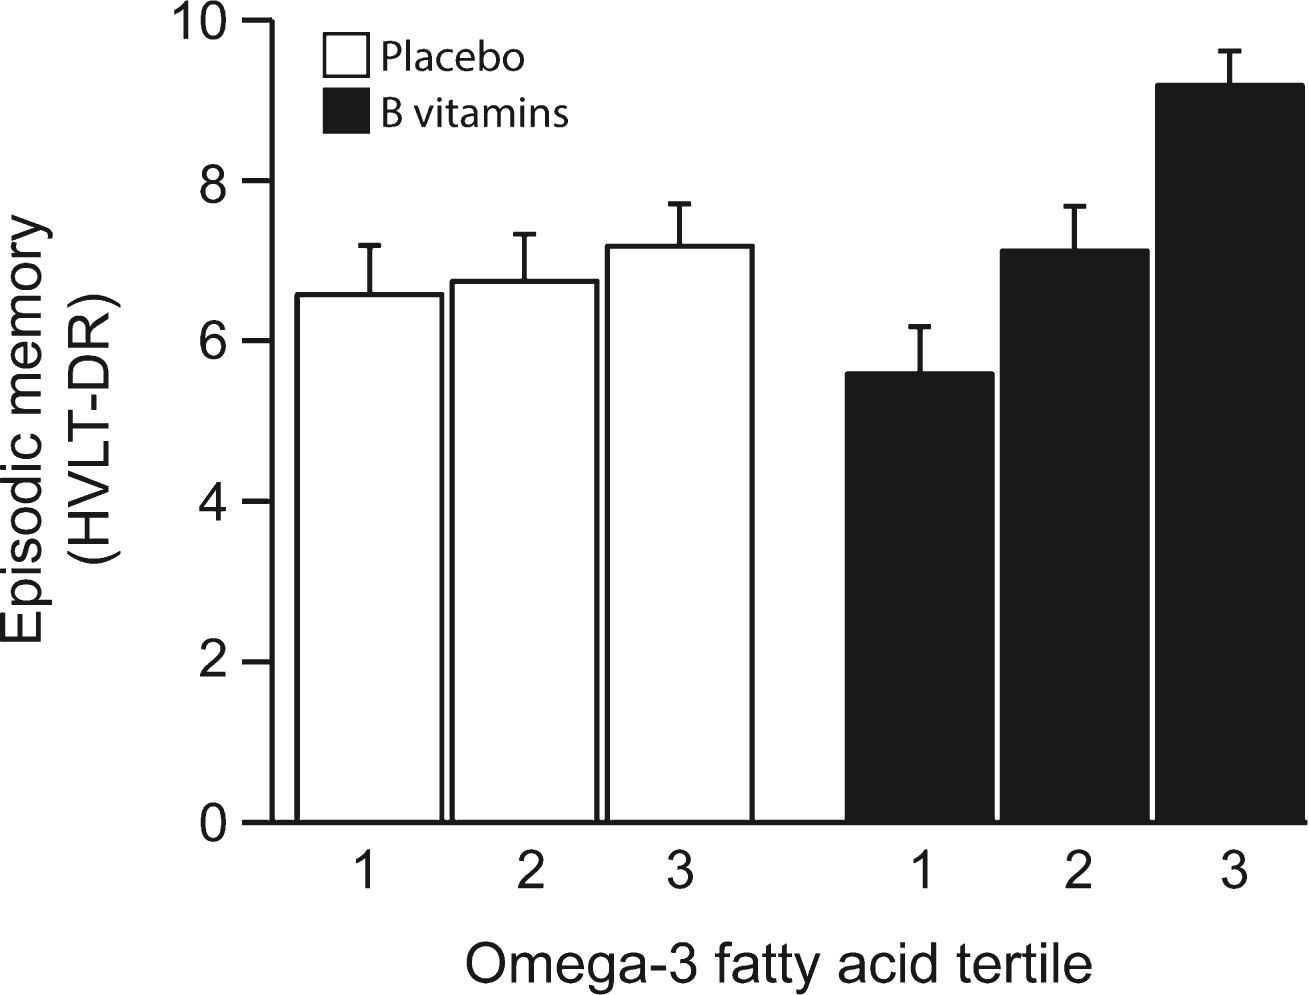 Episodic memory score after 2 years according to baseline omega-3 fatty acid concentration. The interaction between omega-3 tertiles and B vitamin treatment was significant (p = 0.028). In the third tertile of the combined omega-3 fatty acid concentration, the memory score in the B vitamin group was higher than in placebo (p = 0.047). In the B vitamin group, memory score in the 3rd tertile of omega-3 was higher than in the 1st tertile (p = 0.01). See Table 2. Columns show mean scores and error bars indicate SEM.